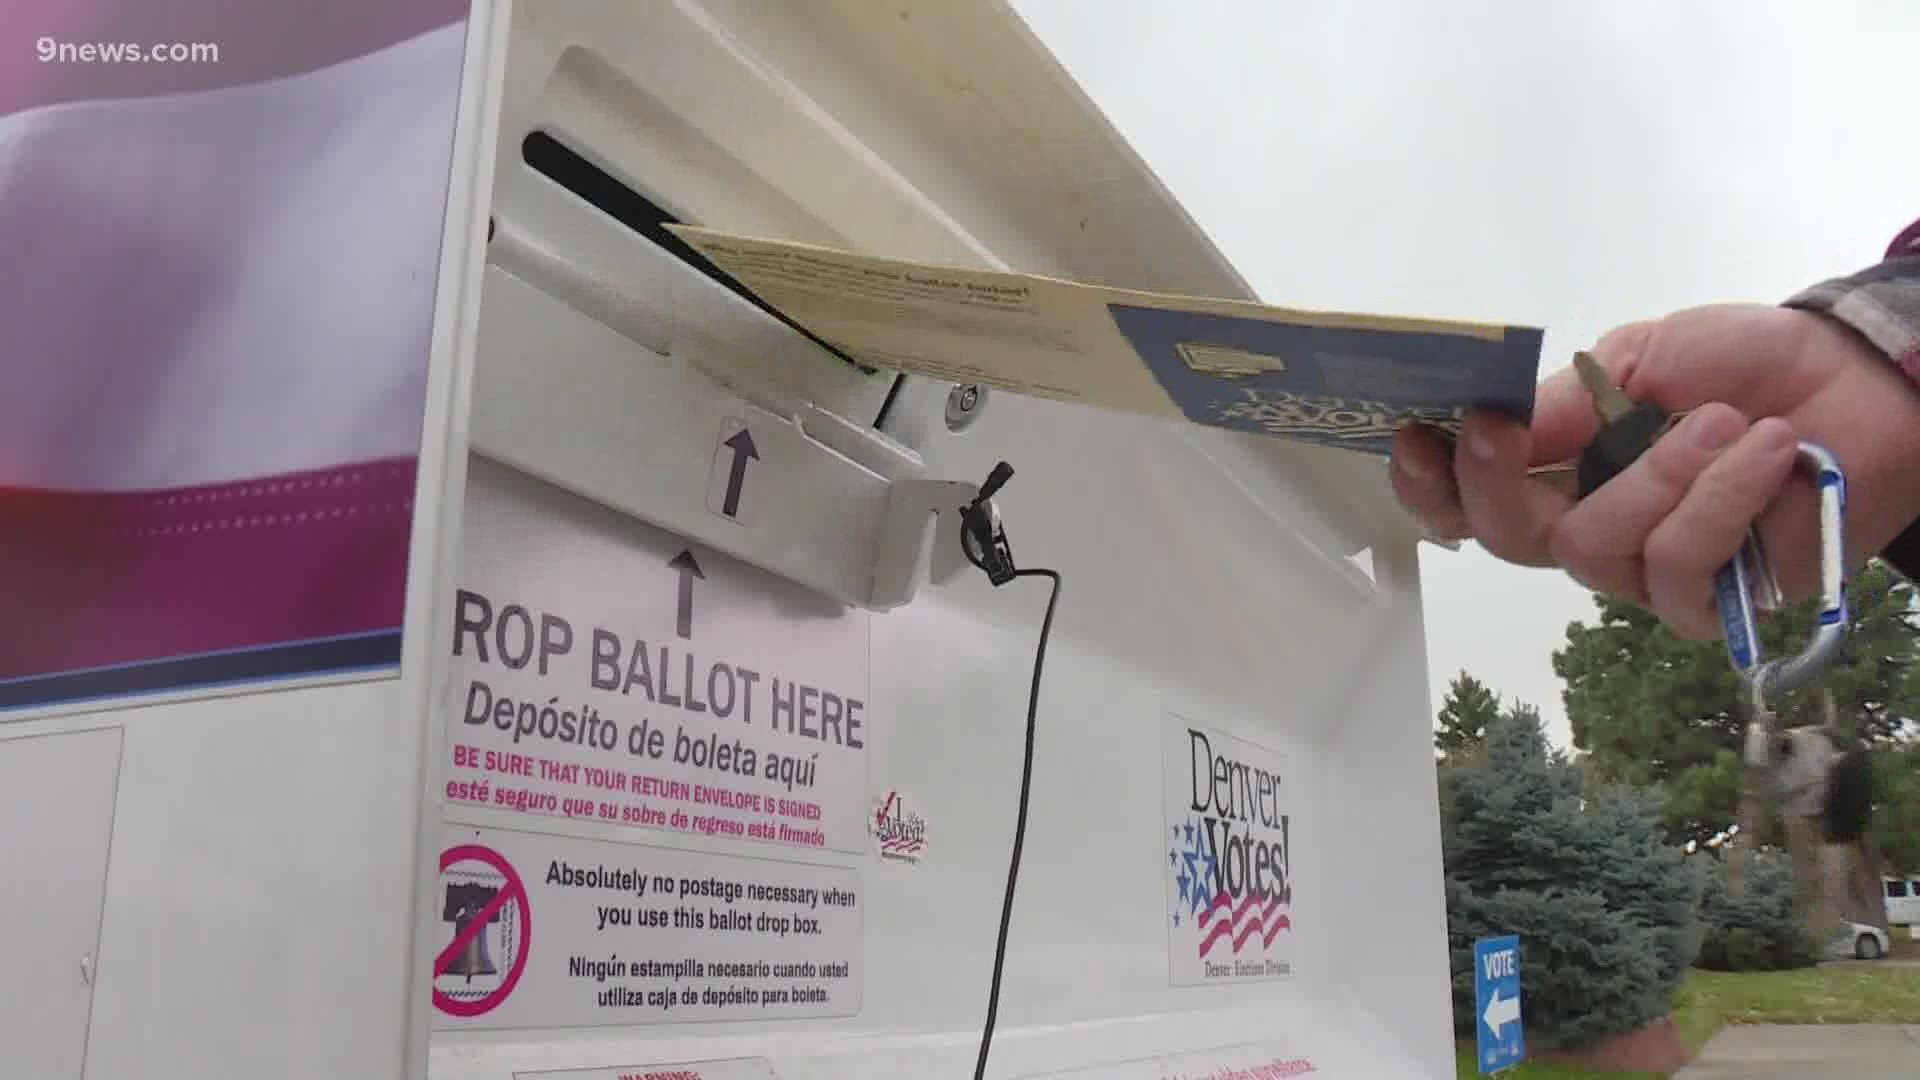 Local community groups and neighbors are coming together this election season, volunteering to help fellow Coloradans deliver their vote before the deadline.